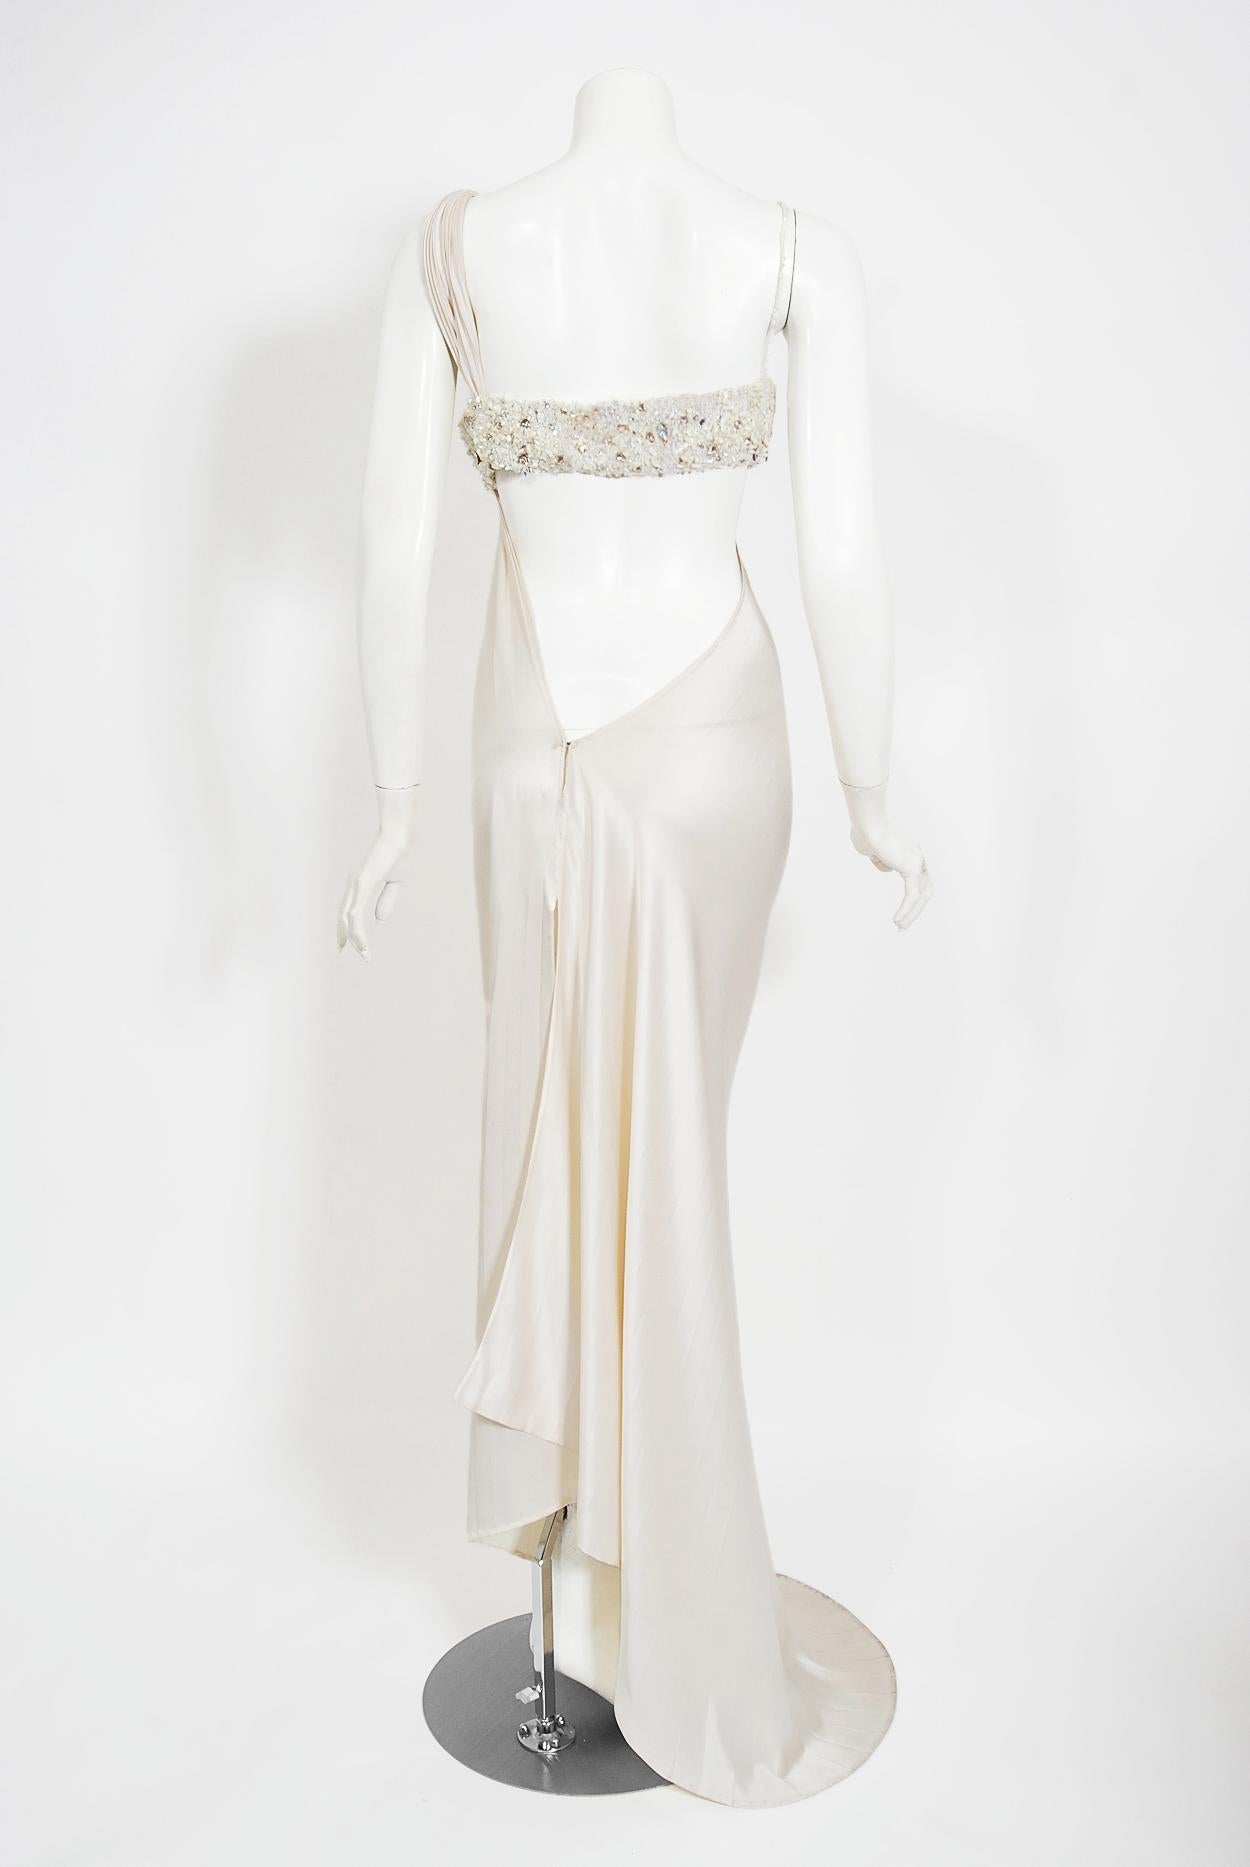 2000 Ungaro Haute Couture Crystal Beaded Asymmetric Cut-Out Ivory Silk Gown 7